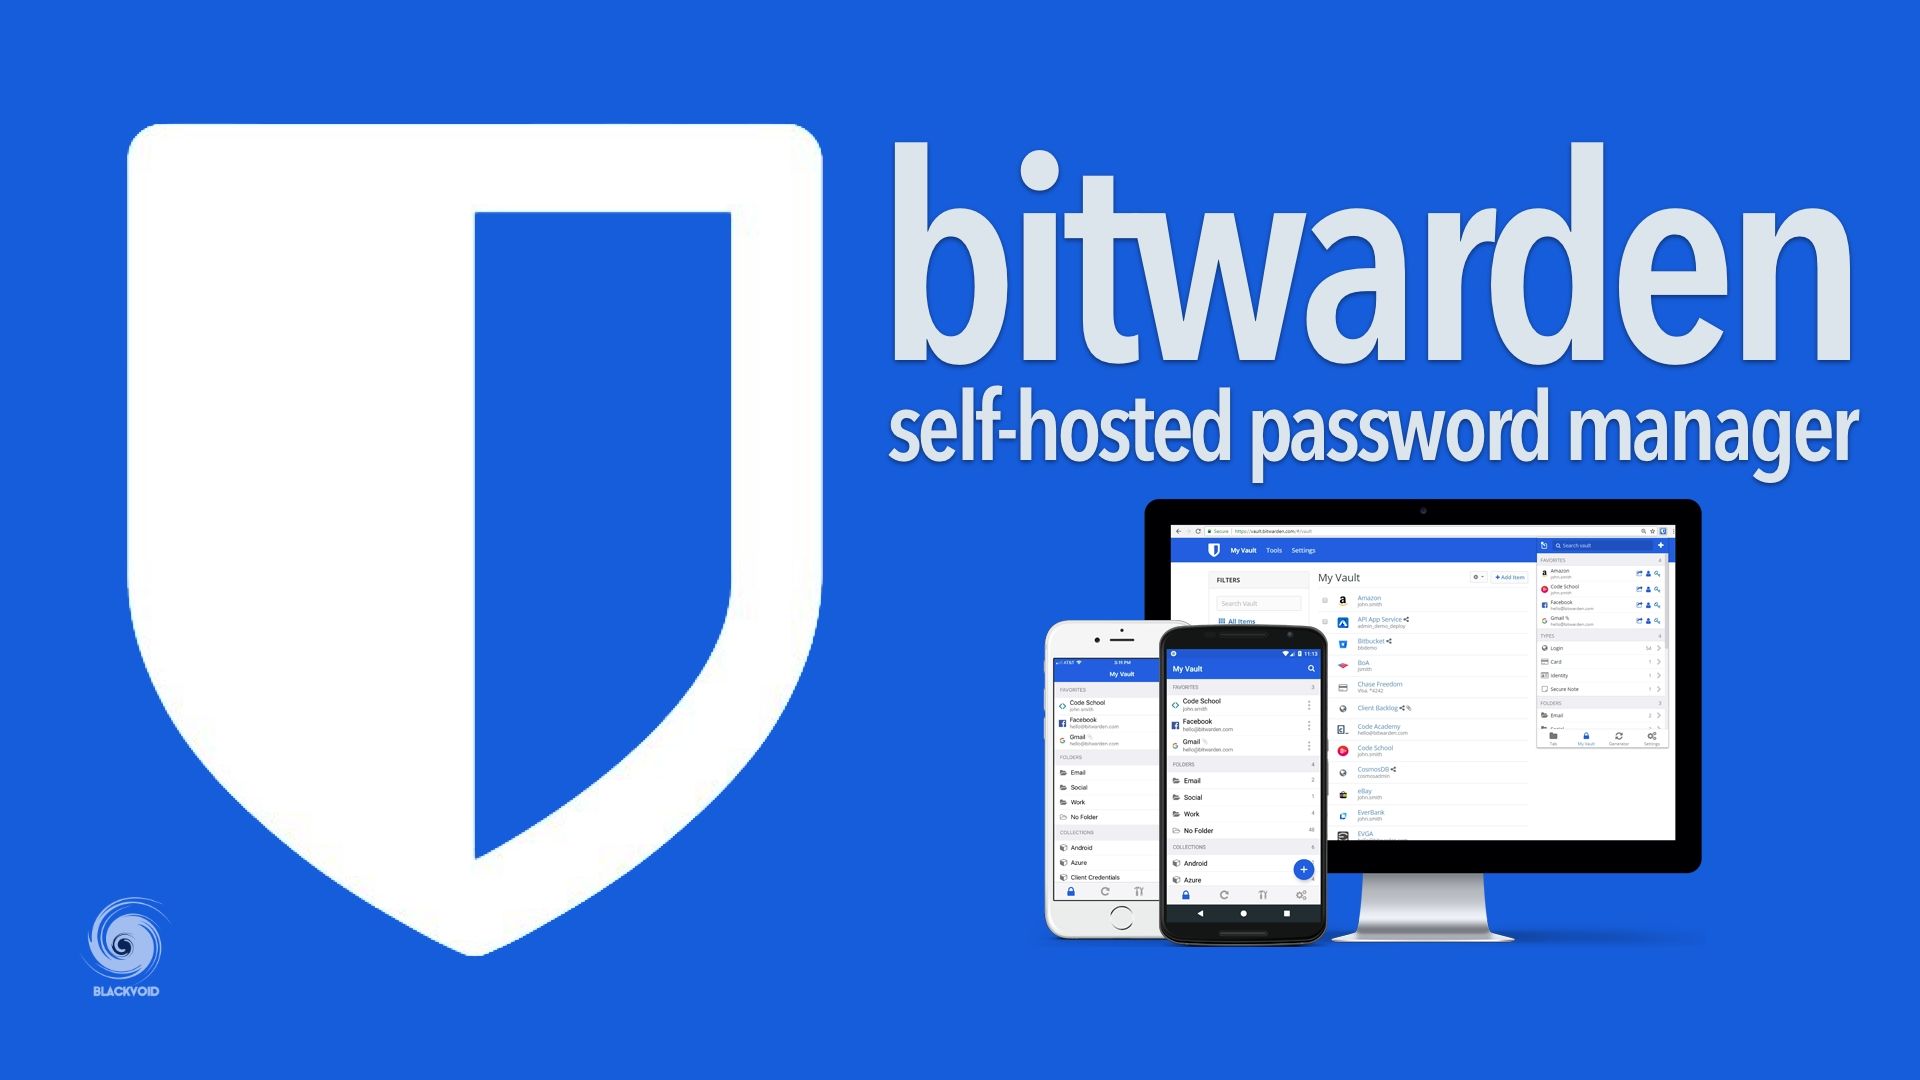 Bitwarden - a self-hosted password manager